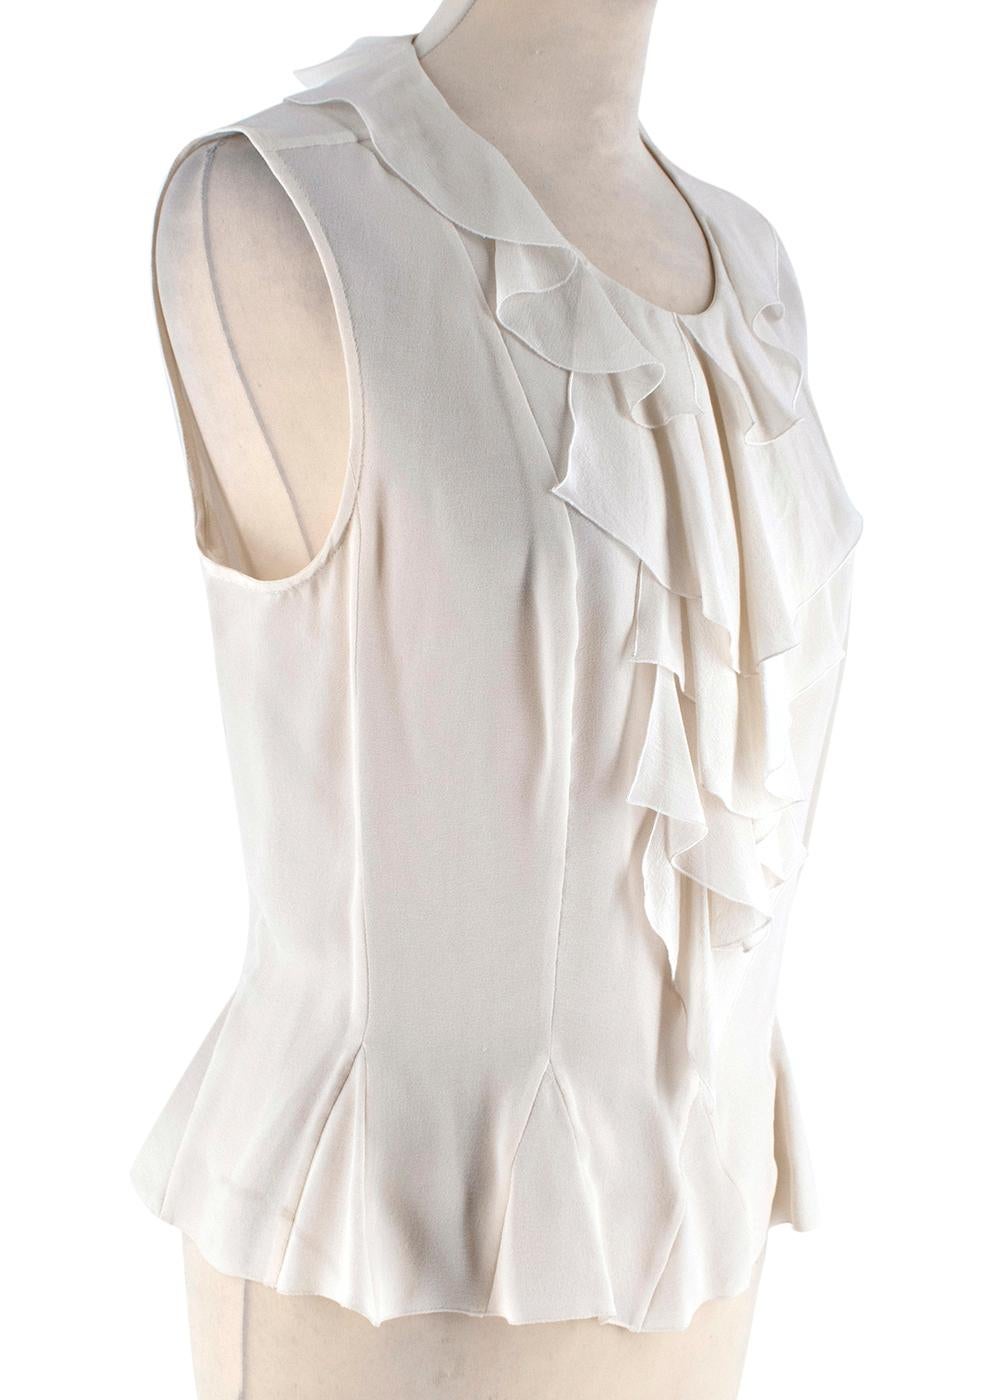 Chanel Ivory Silk Ruffled Sleeveless Blouse

-Made of super soft lightweight silk 
-Ruffled detail to the neck and front 
-Round neckline 
-Classic cut 
-Small triangular panels to the hem giving it a flared effect 
-Branded chanel pearl button